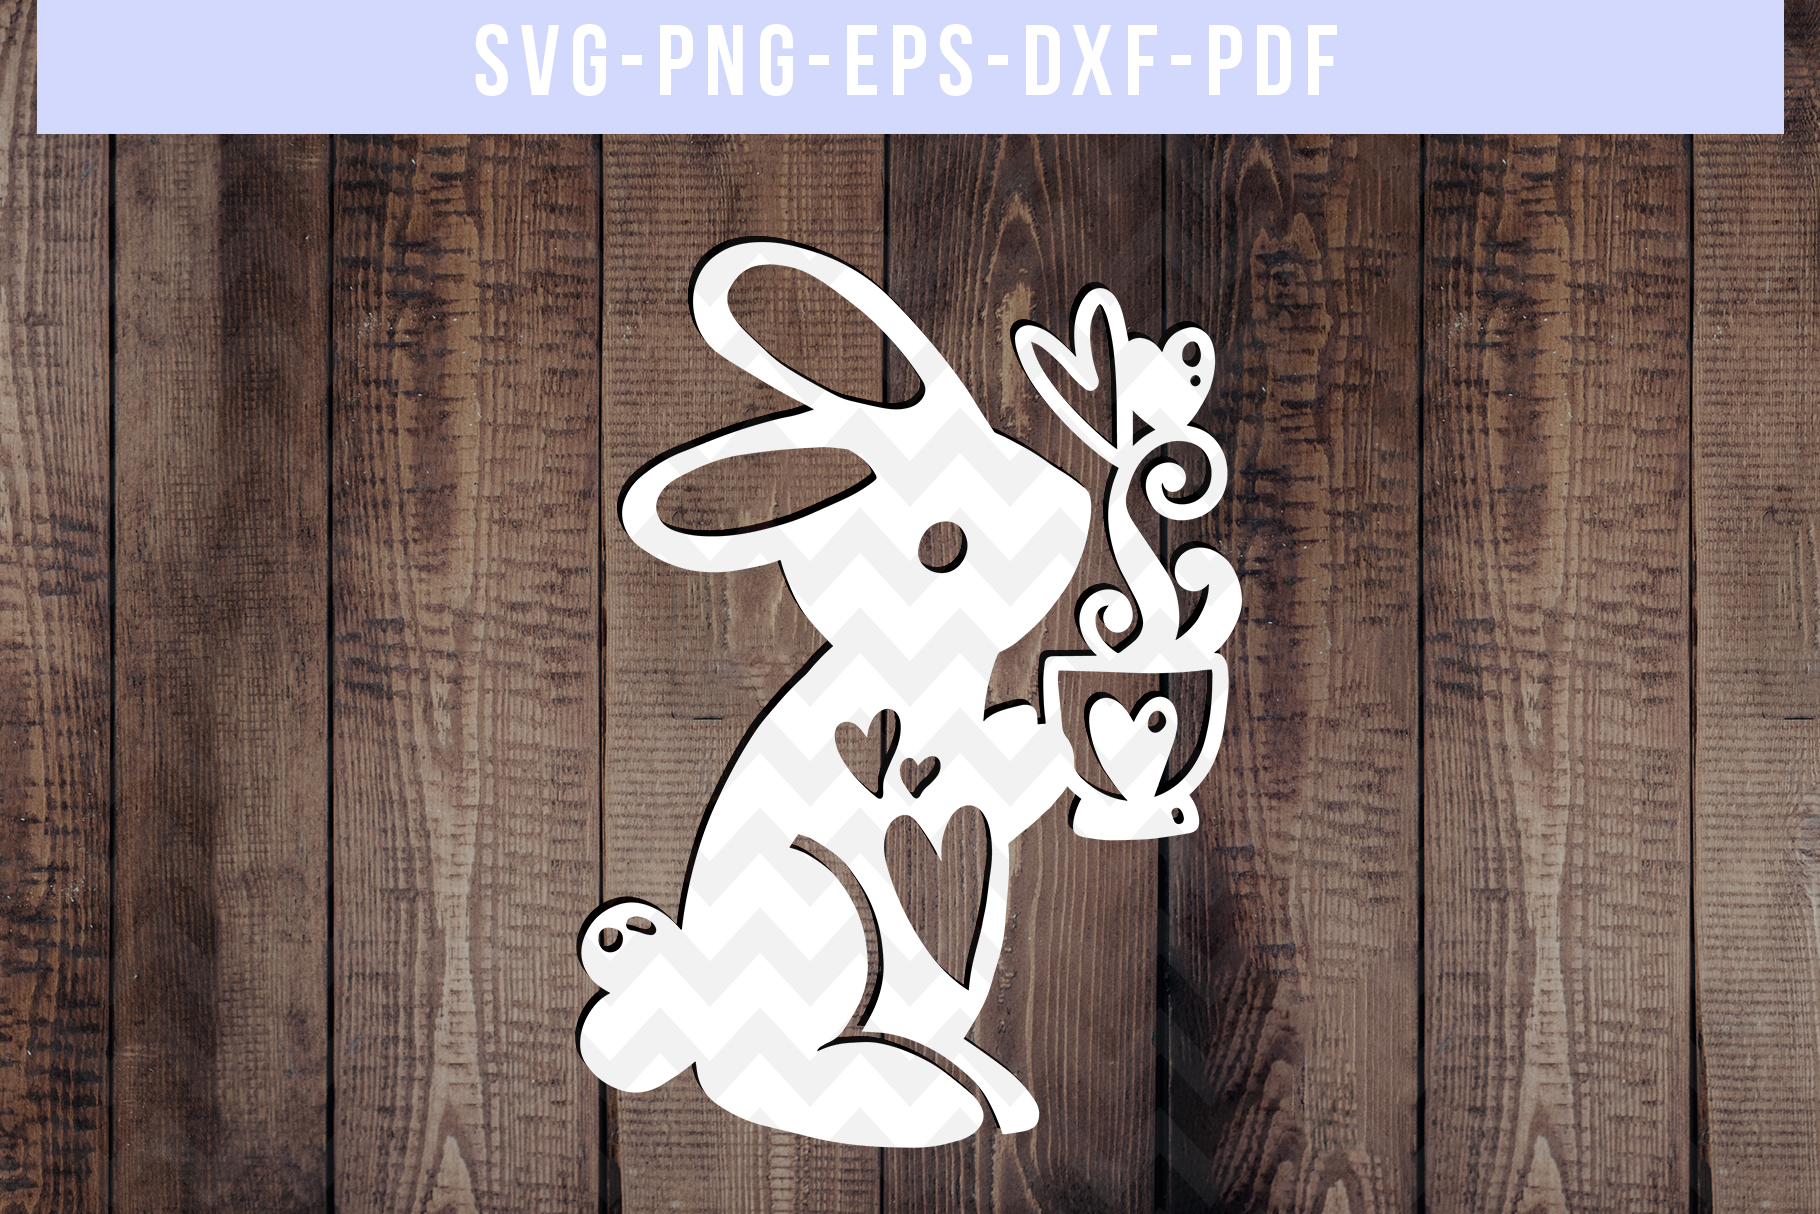 Download Male Bunny Papercut Template, Valentine's Day SVG, DXF ...